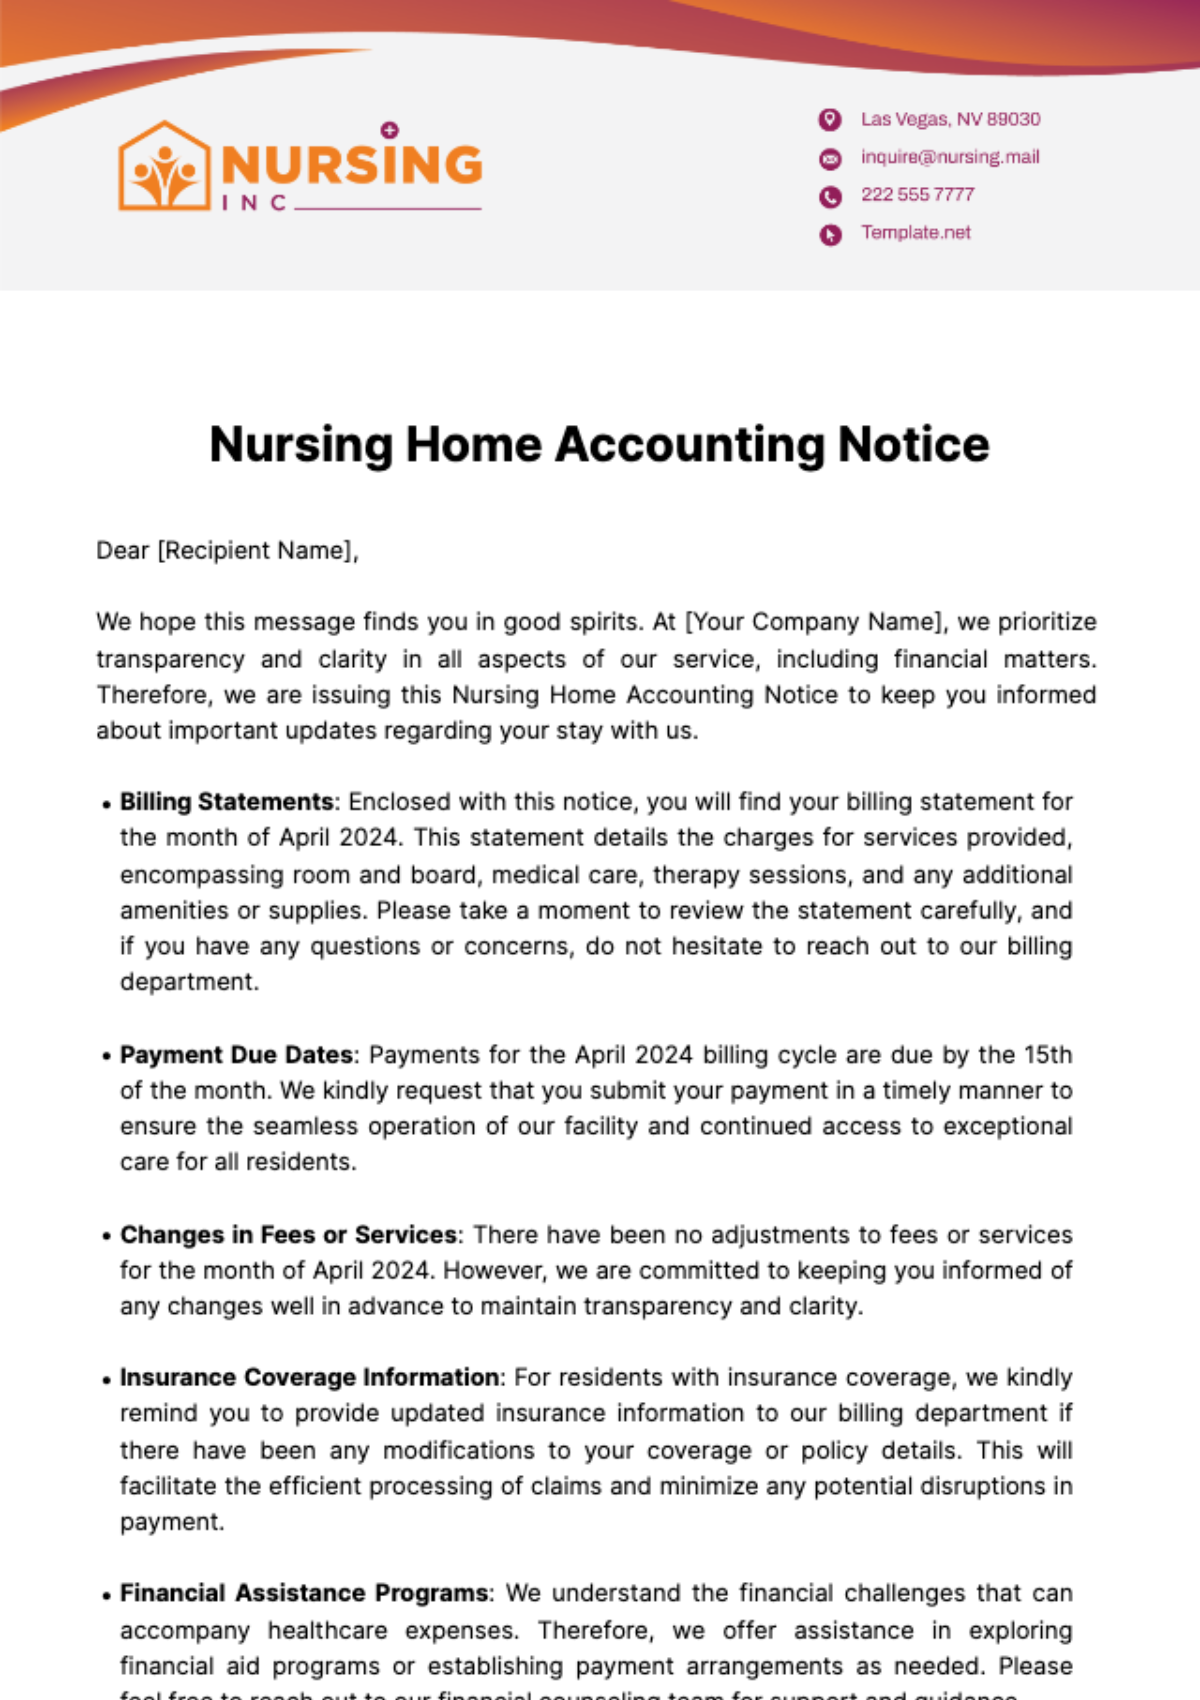 Nursing Home Accounting Notice Template